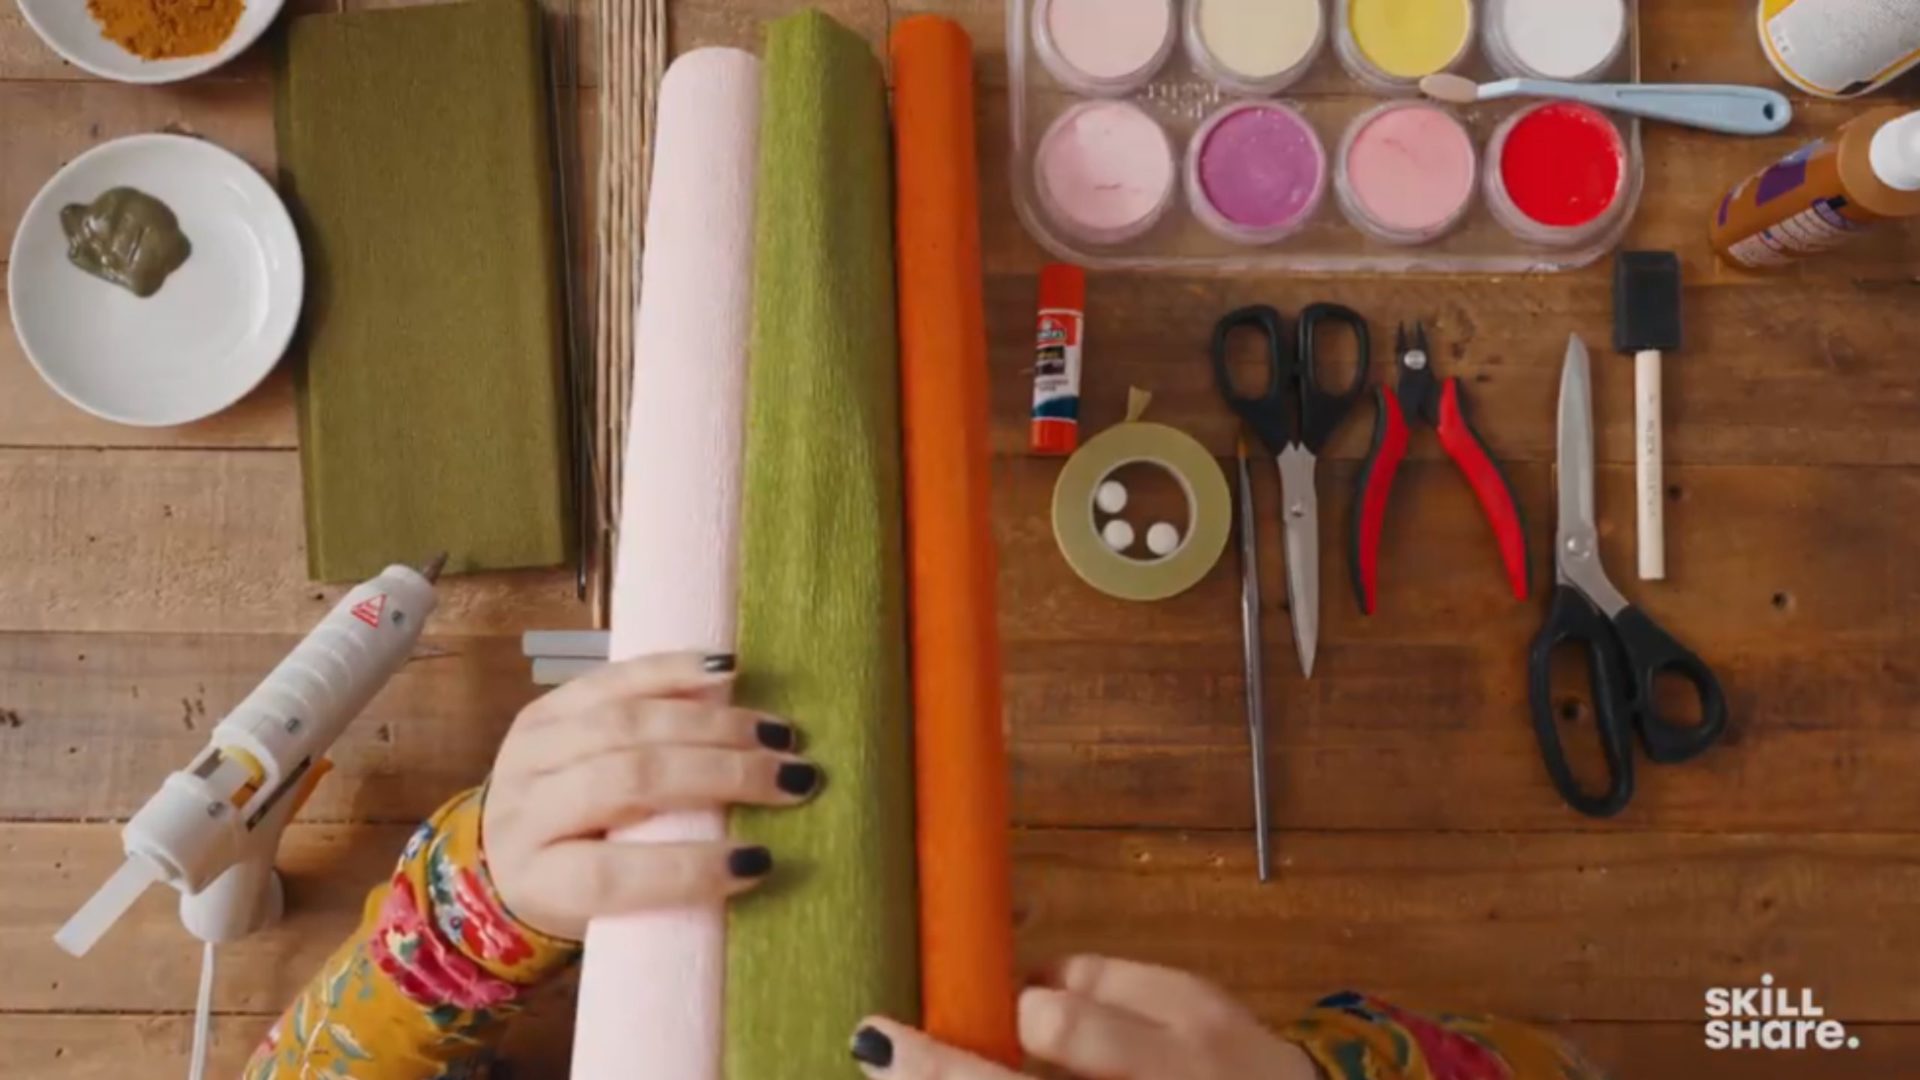 Crepe paper, scissors, paint, and other crafting tools on a wooden desk